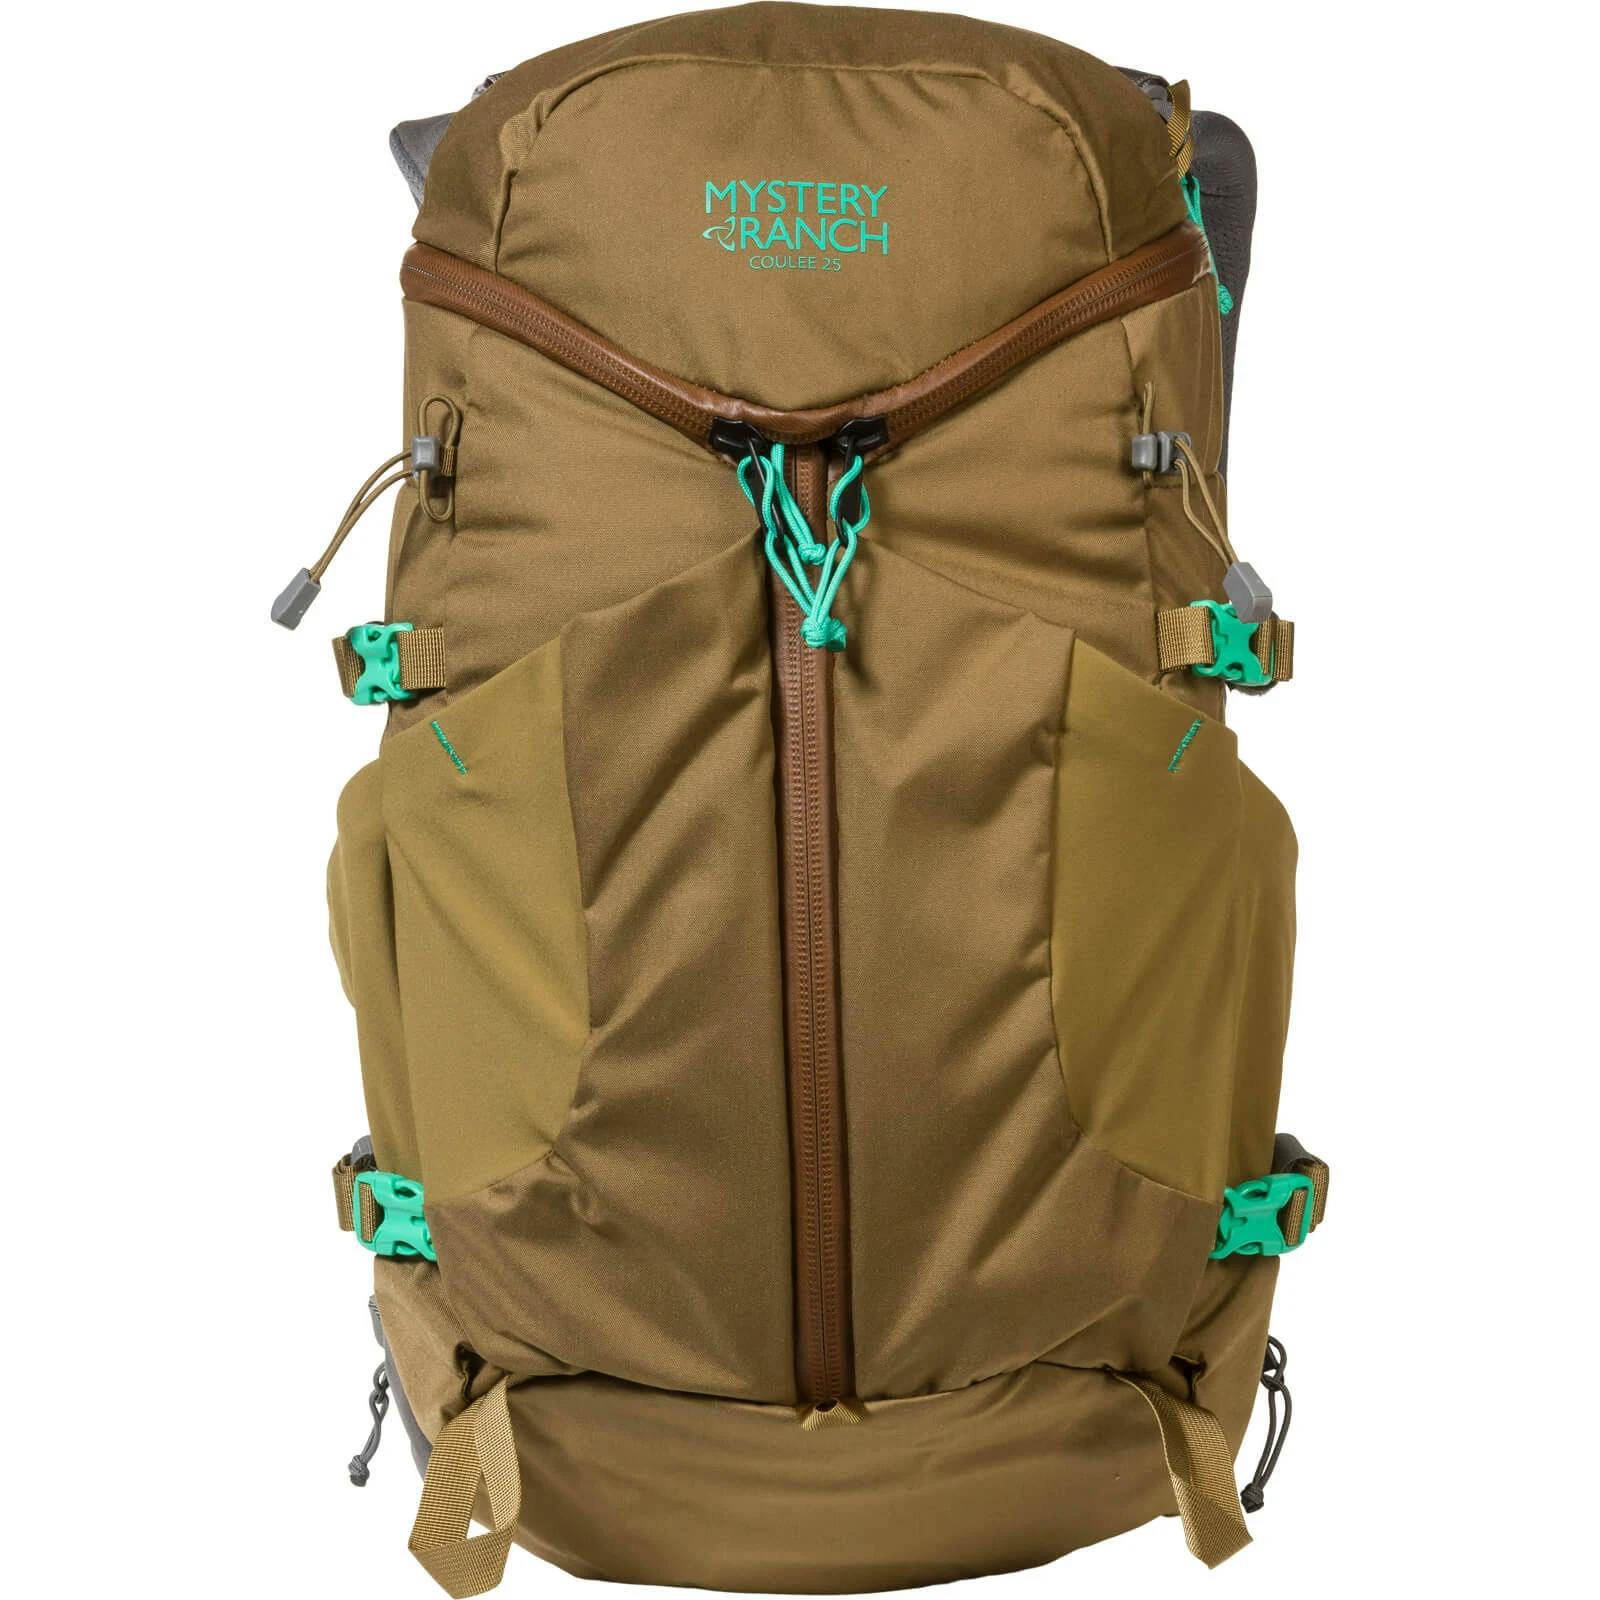 Mystery Ranch Coulee 25 Women's Backpack